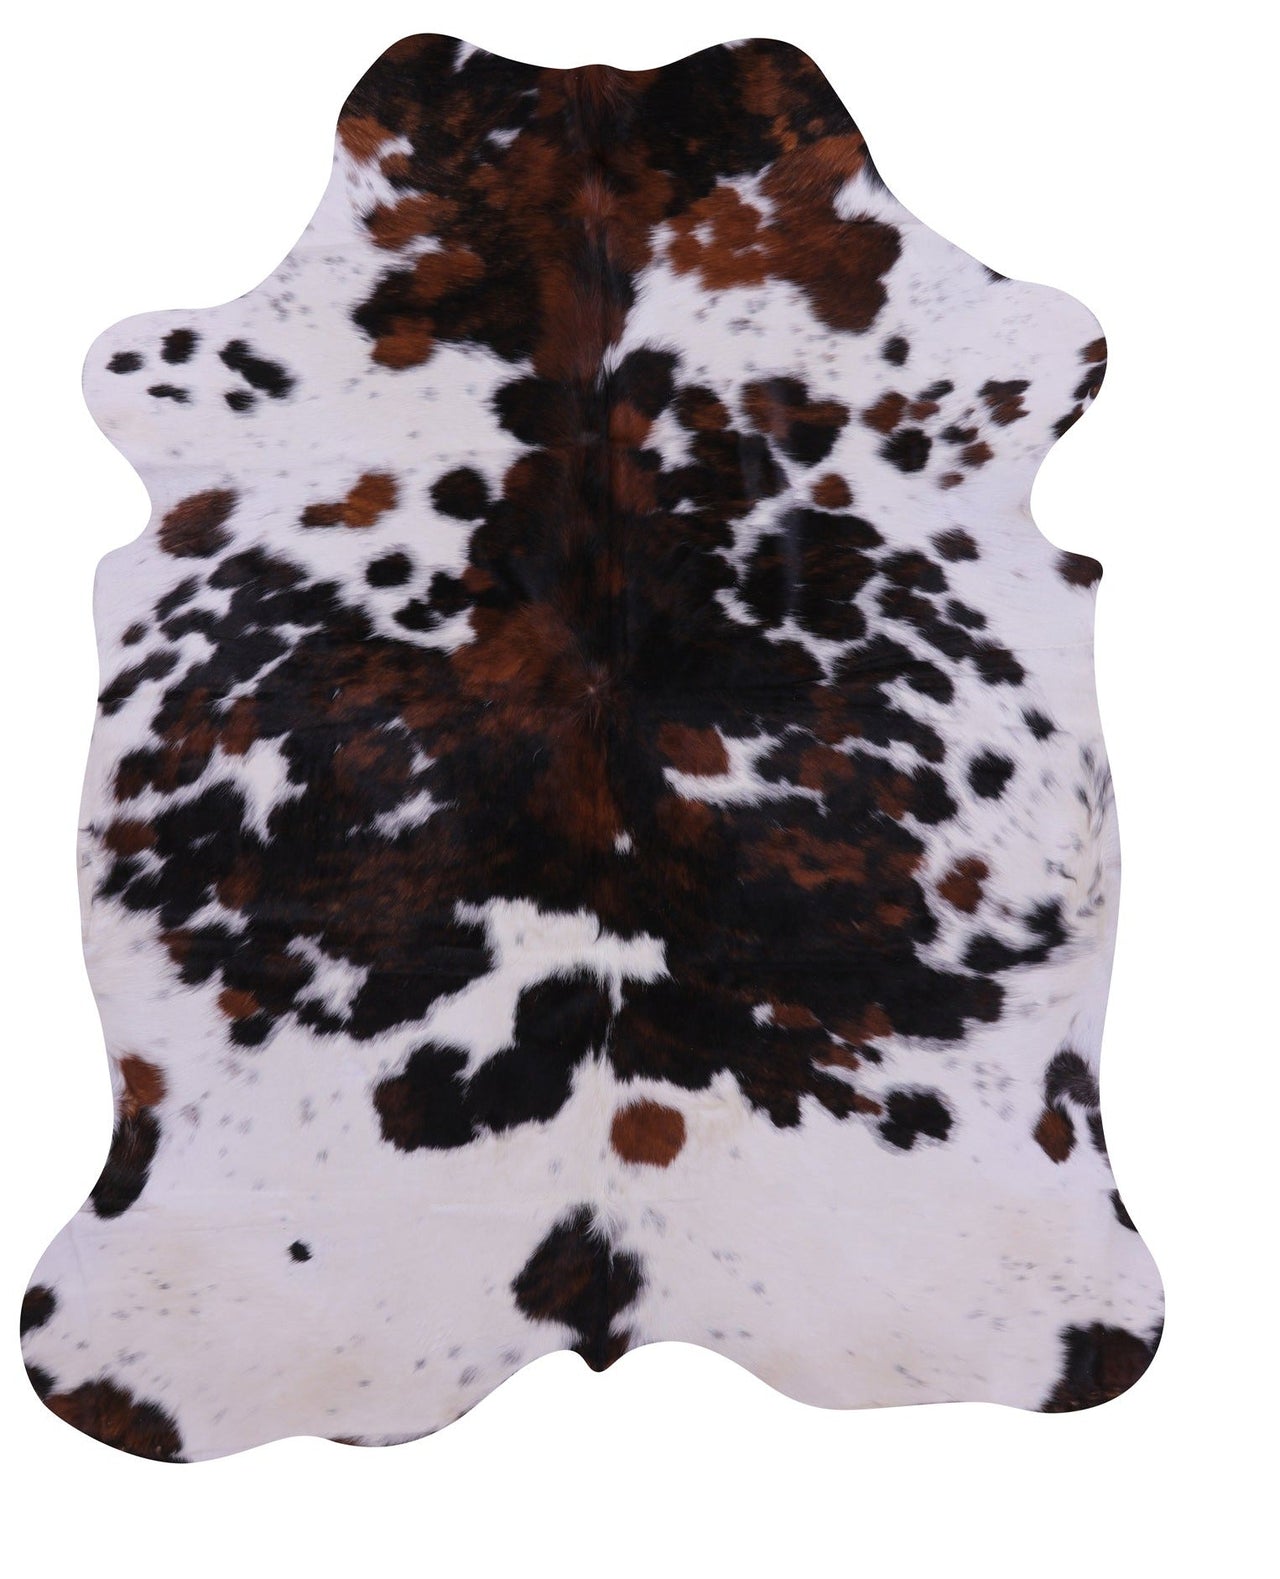 Tricolor Natural Cowhide Rug - Large 7'3"H x 6'0"W